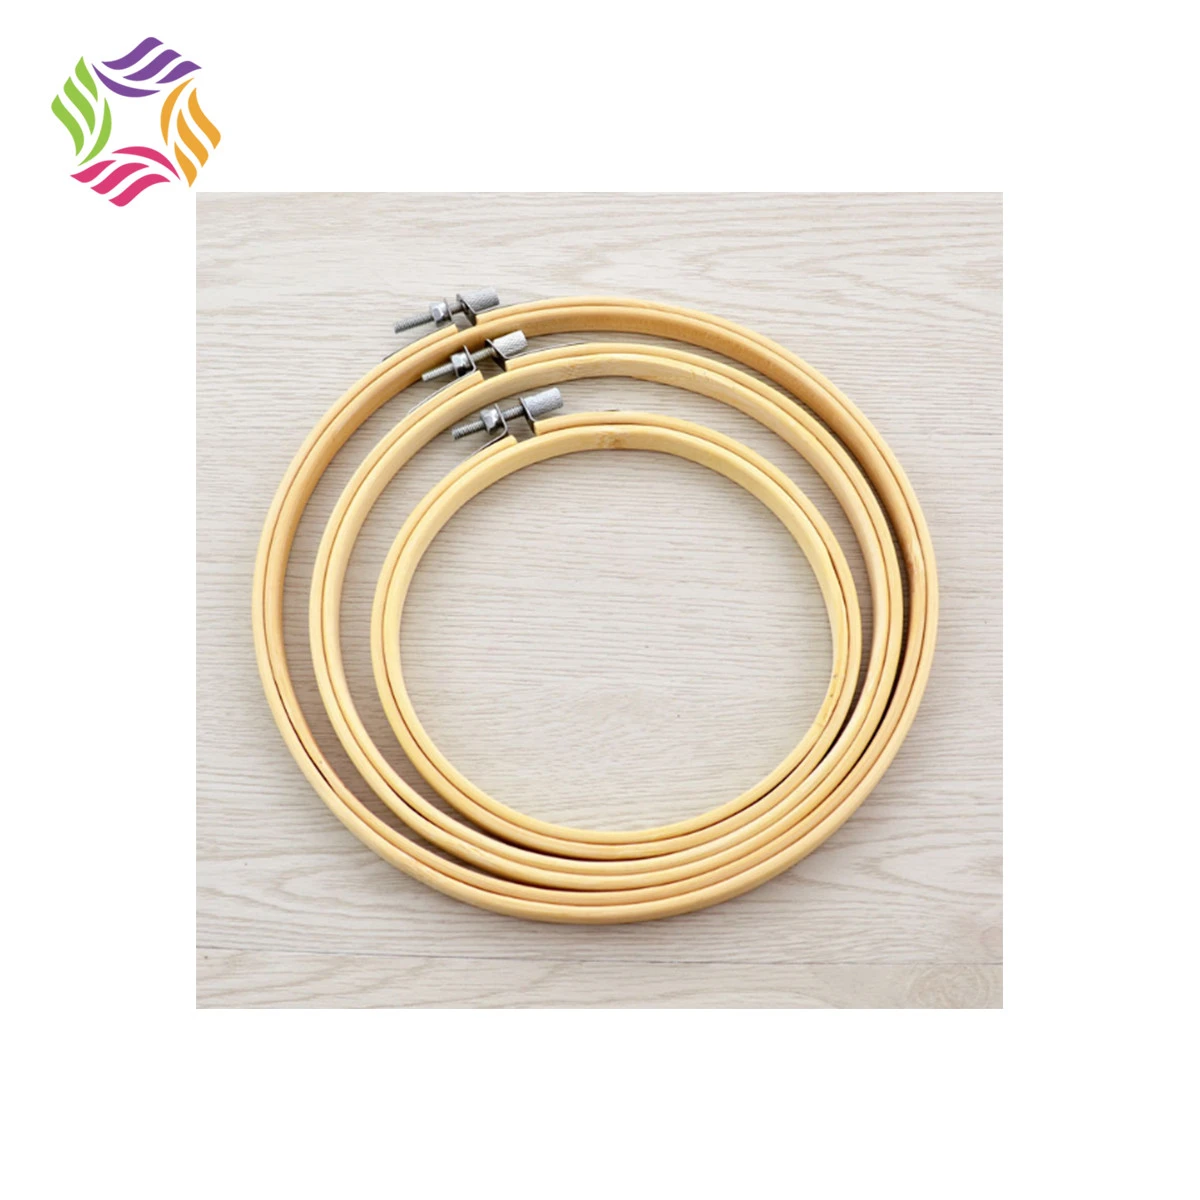 Charmkey rubber ABS natural bamboo embroidery frame hoops plastic needlework for DIY material tool high quality cheap price